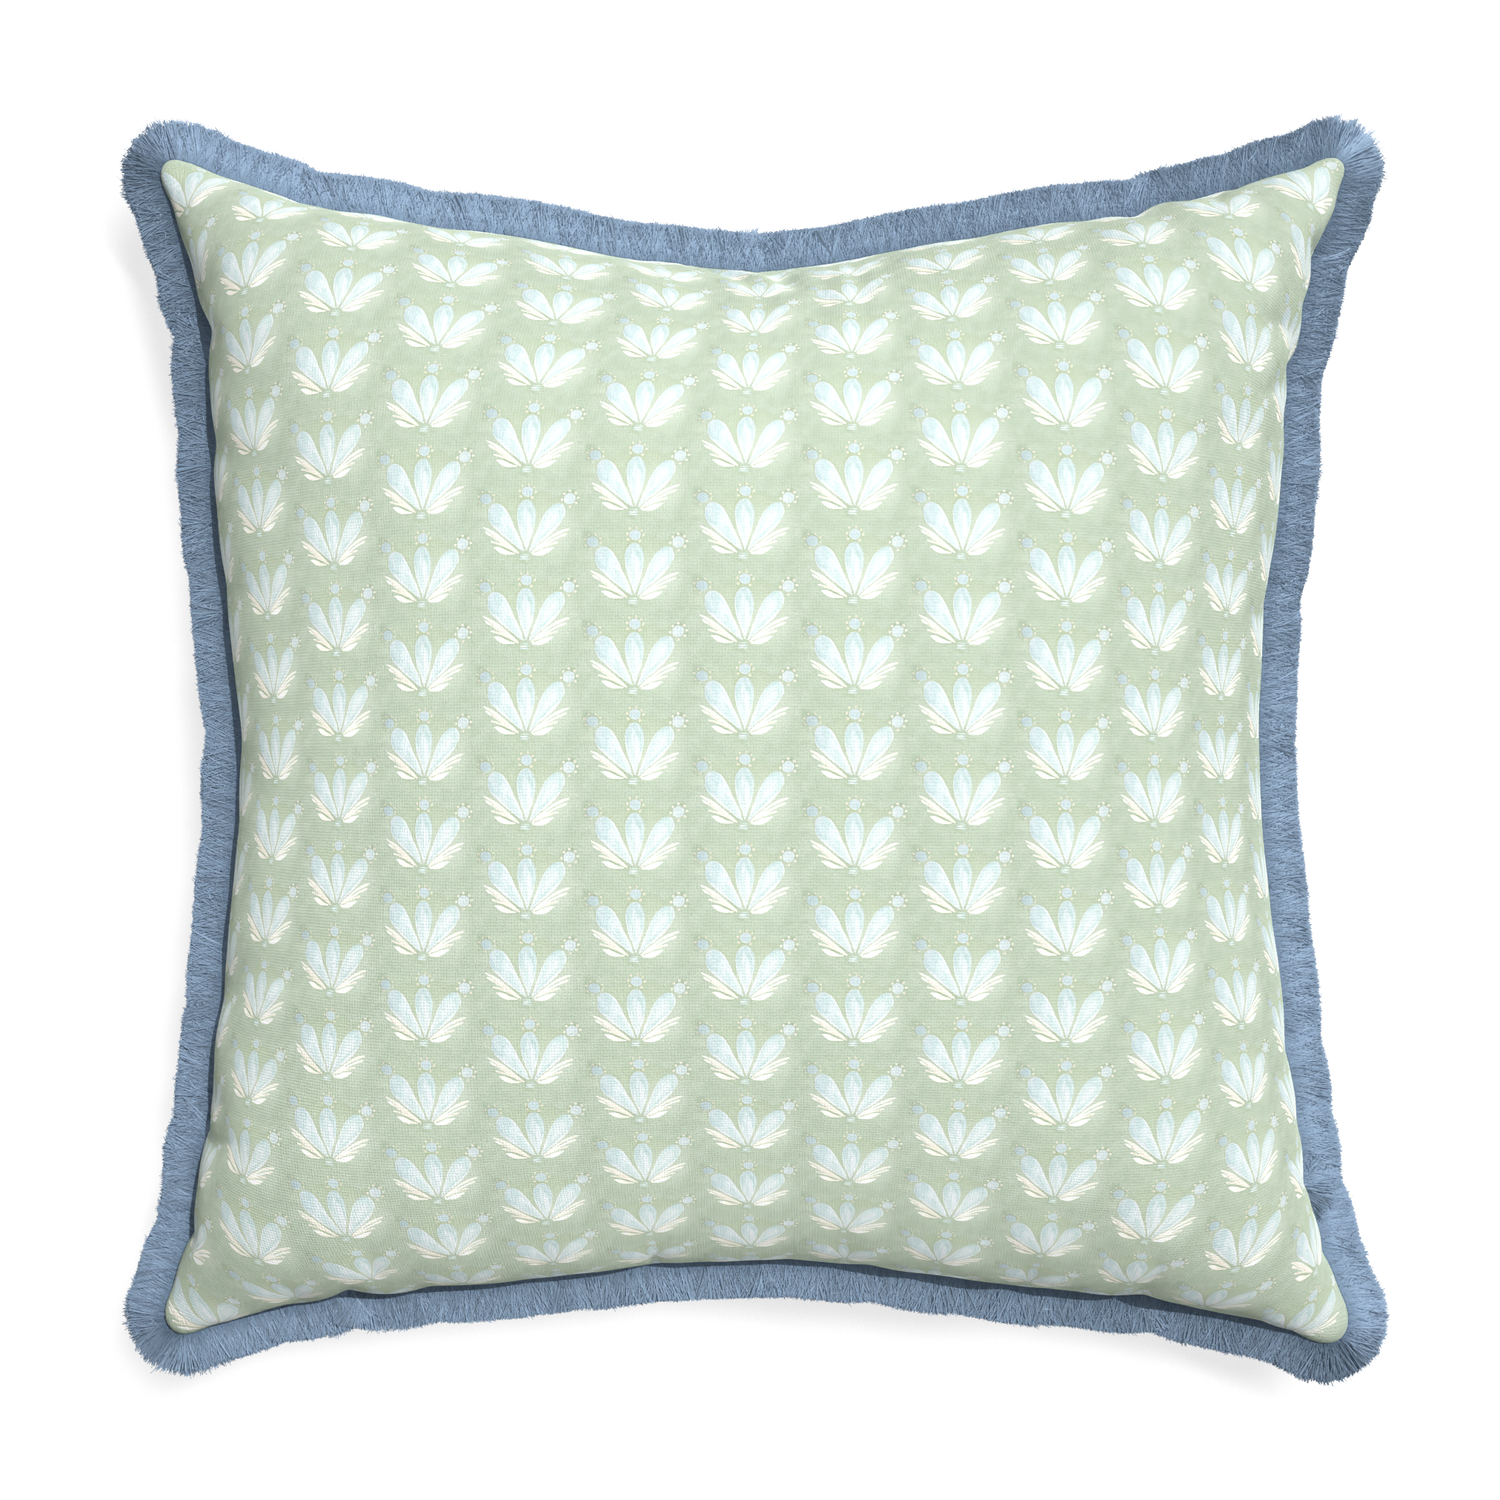 Euro-sham serena sea salt custom blue & green floral drop repeatpillow with sky fringe on white background